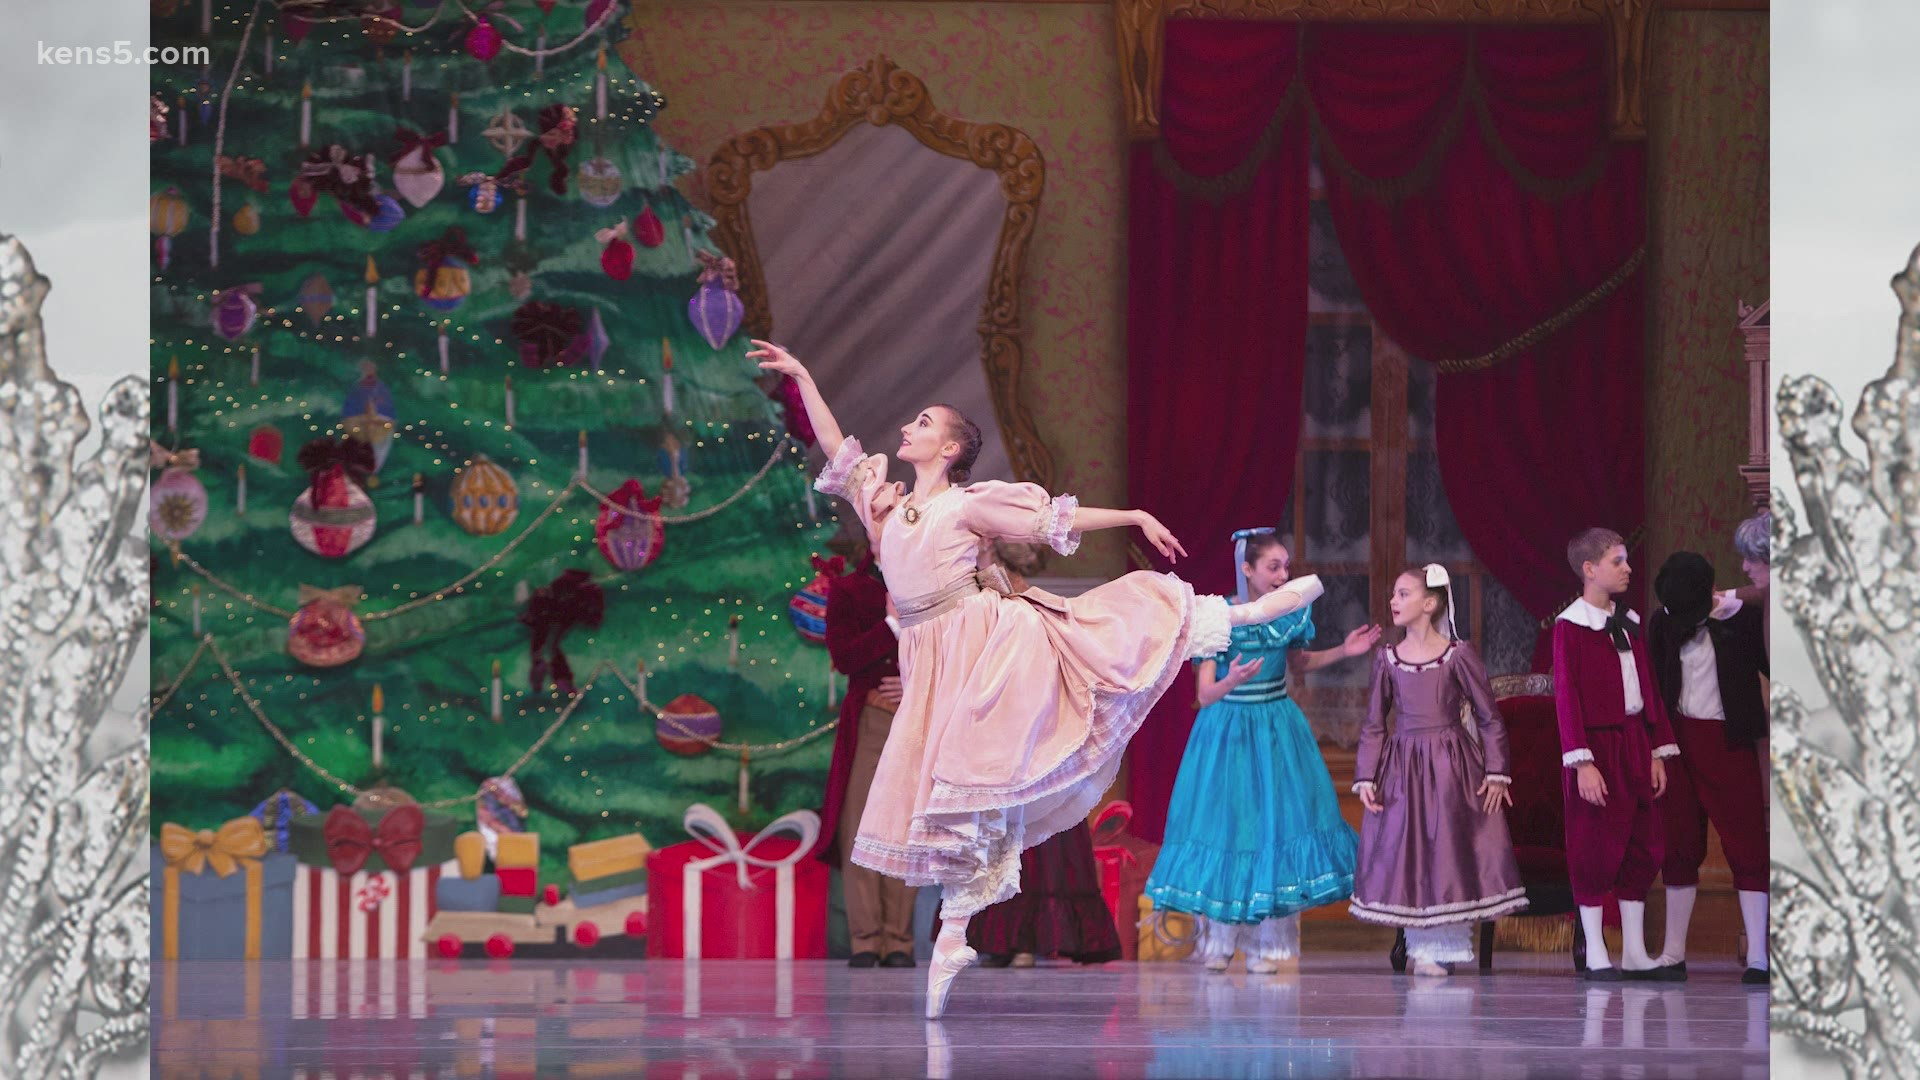 Despite the pandemic, the popular holiday traditional performance will be held at the Tobin Center for the Performing Arts, with some changes.